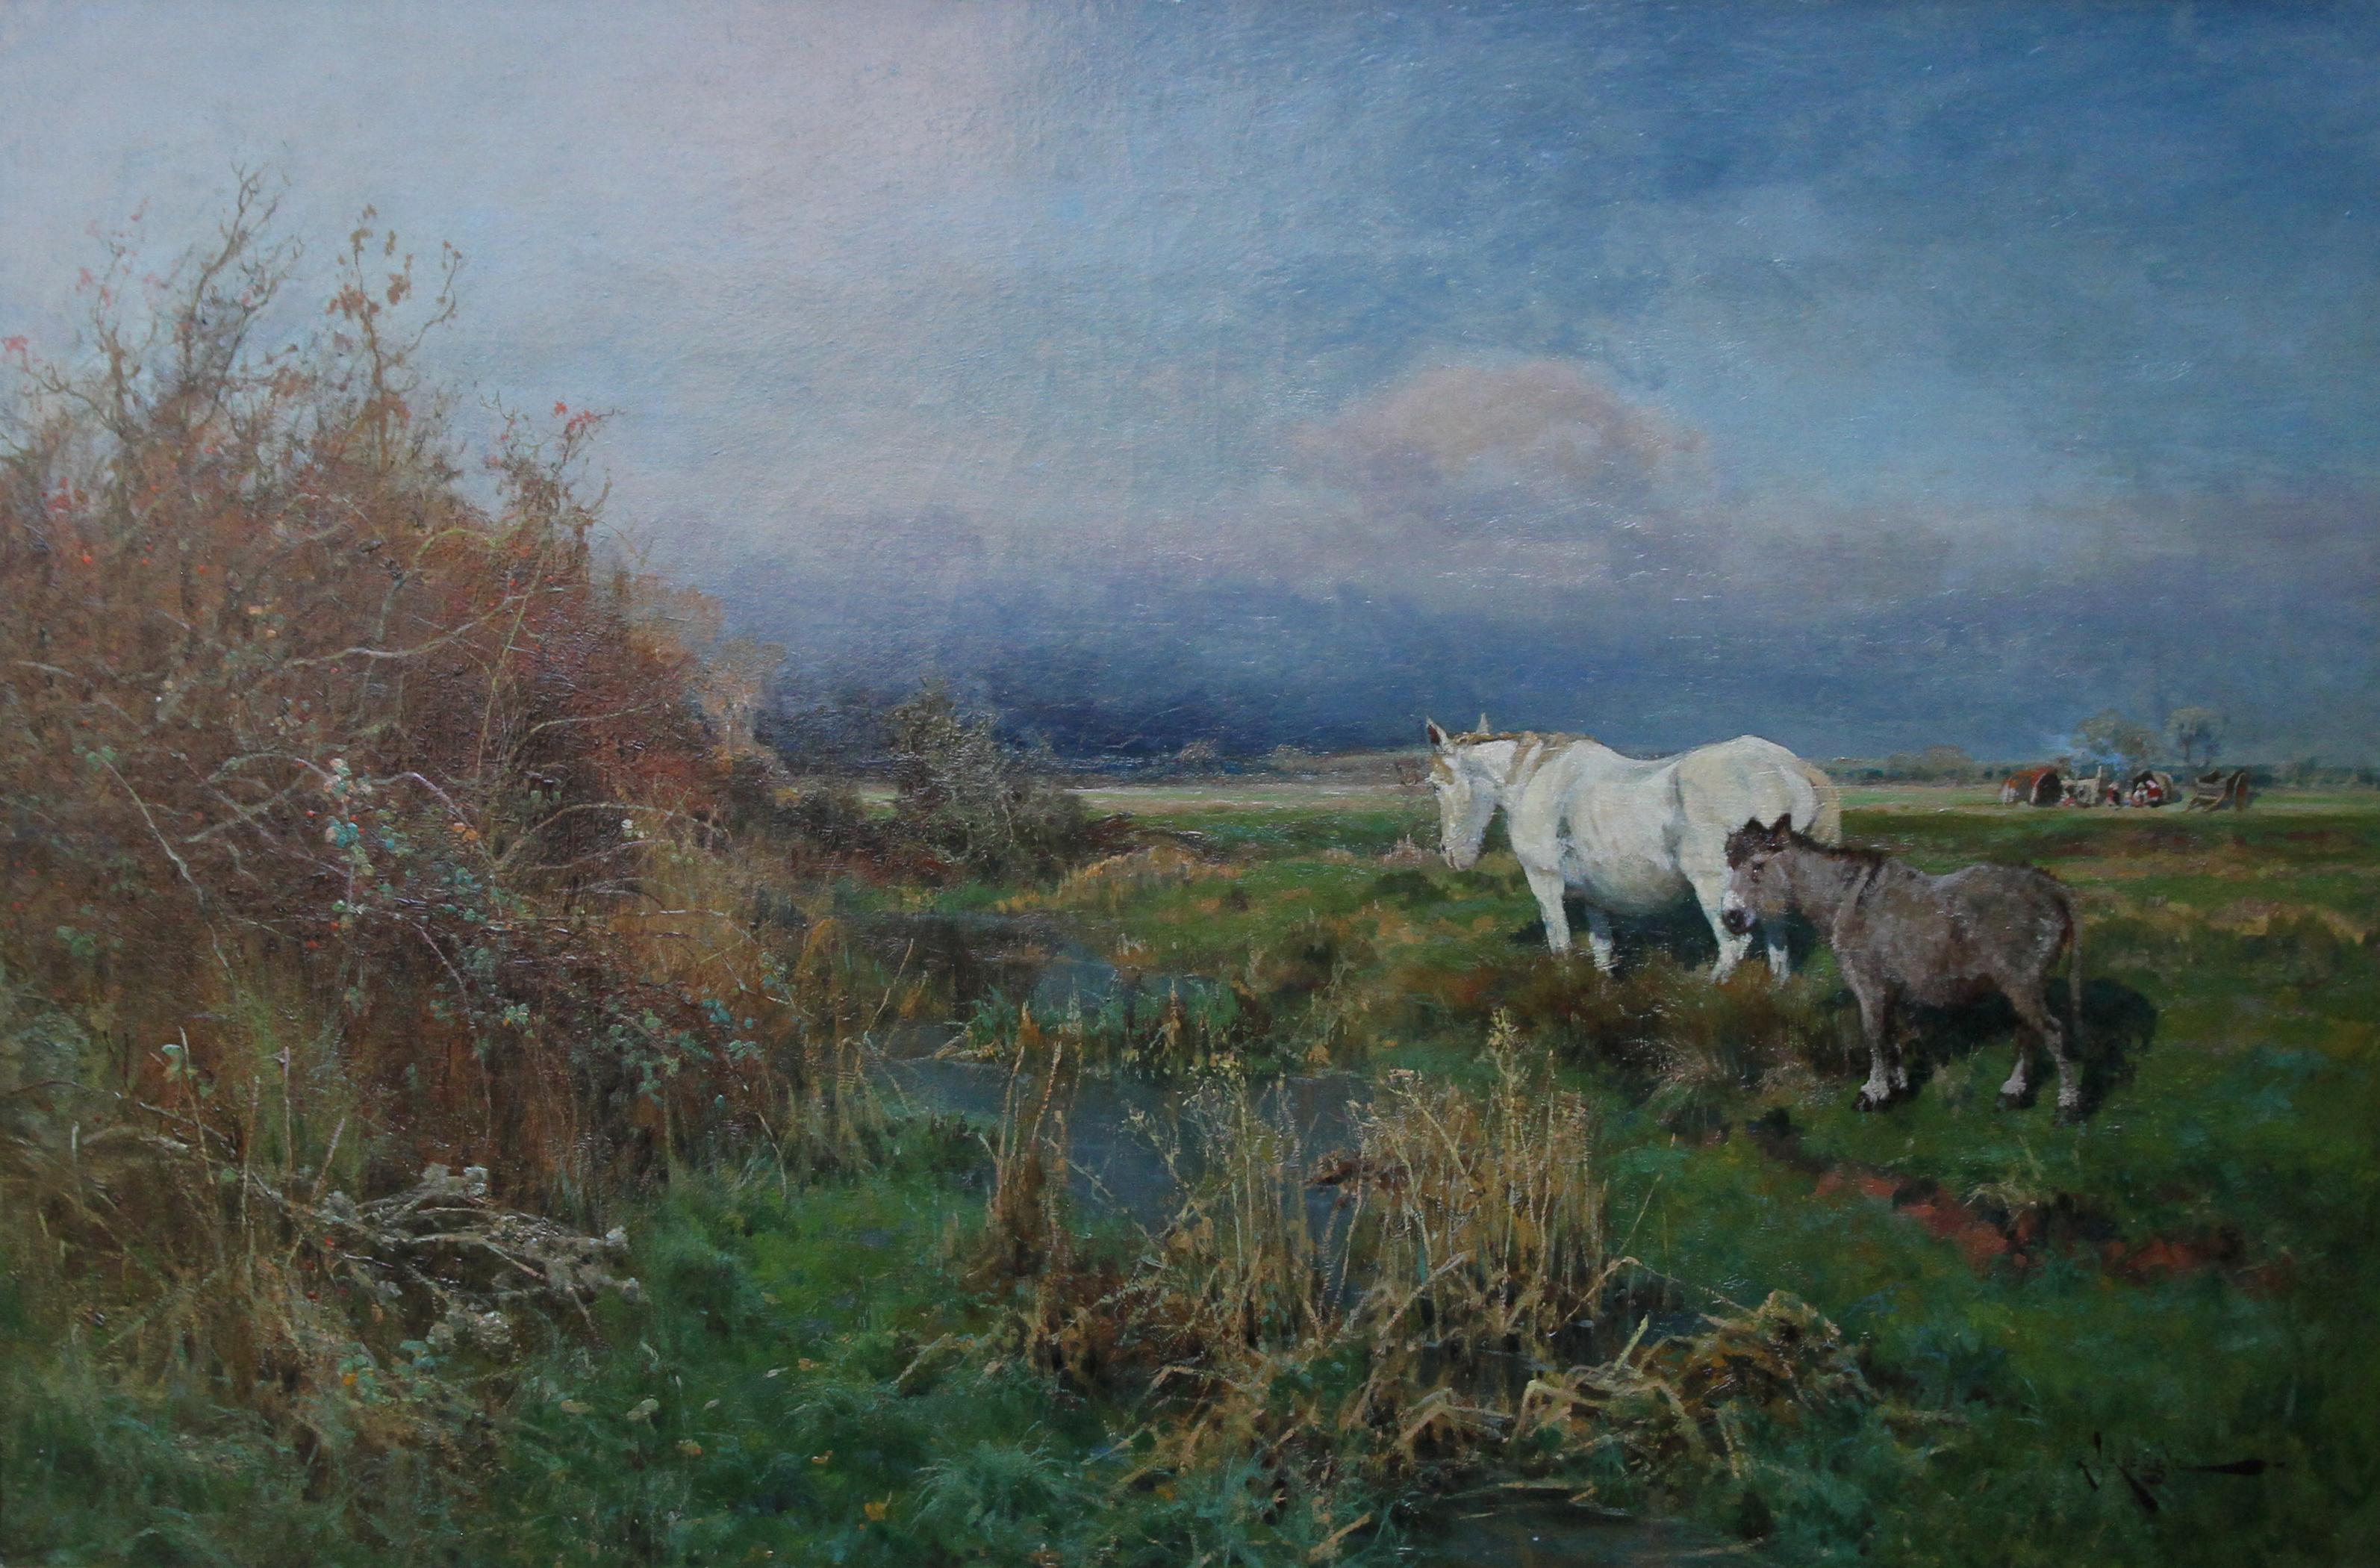 Nottingham Landscape with horse - British 1900 animal oil painting equine art For Sale 5